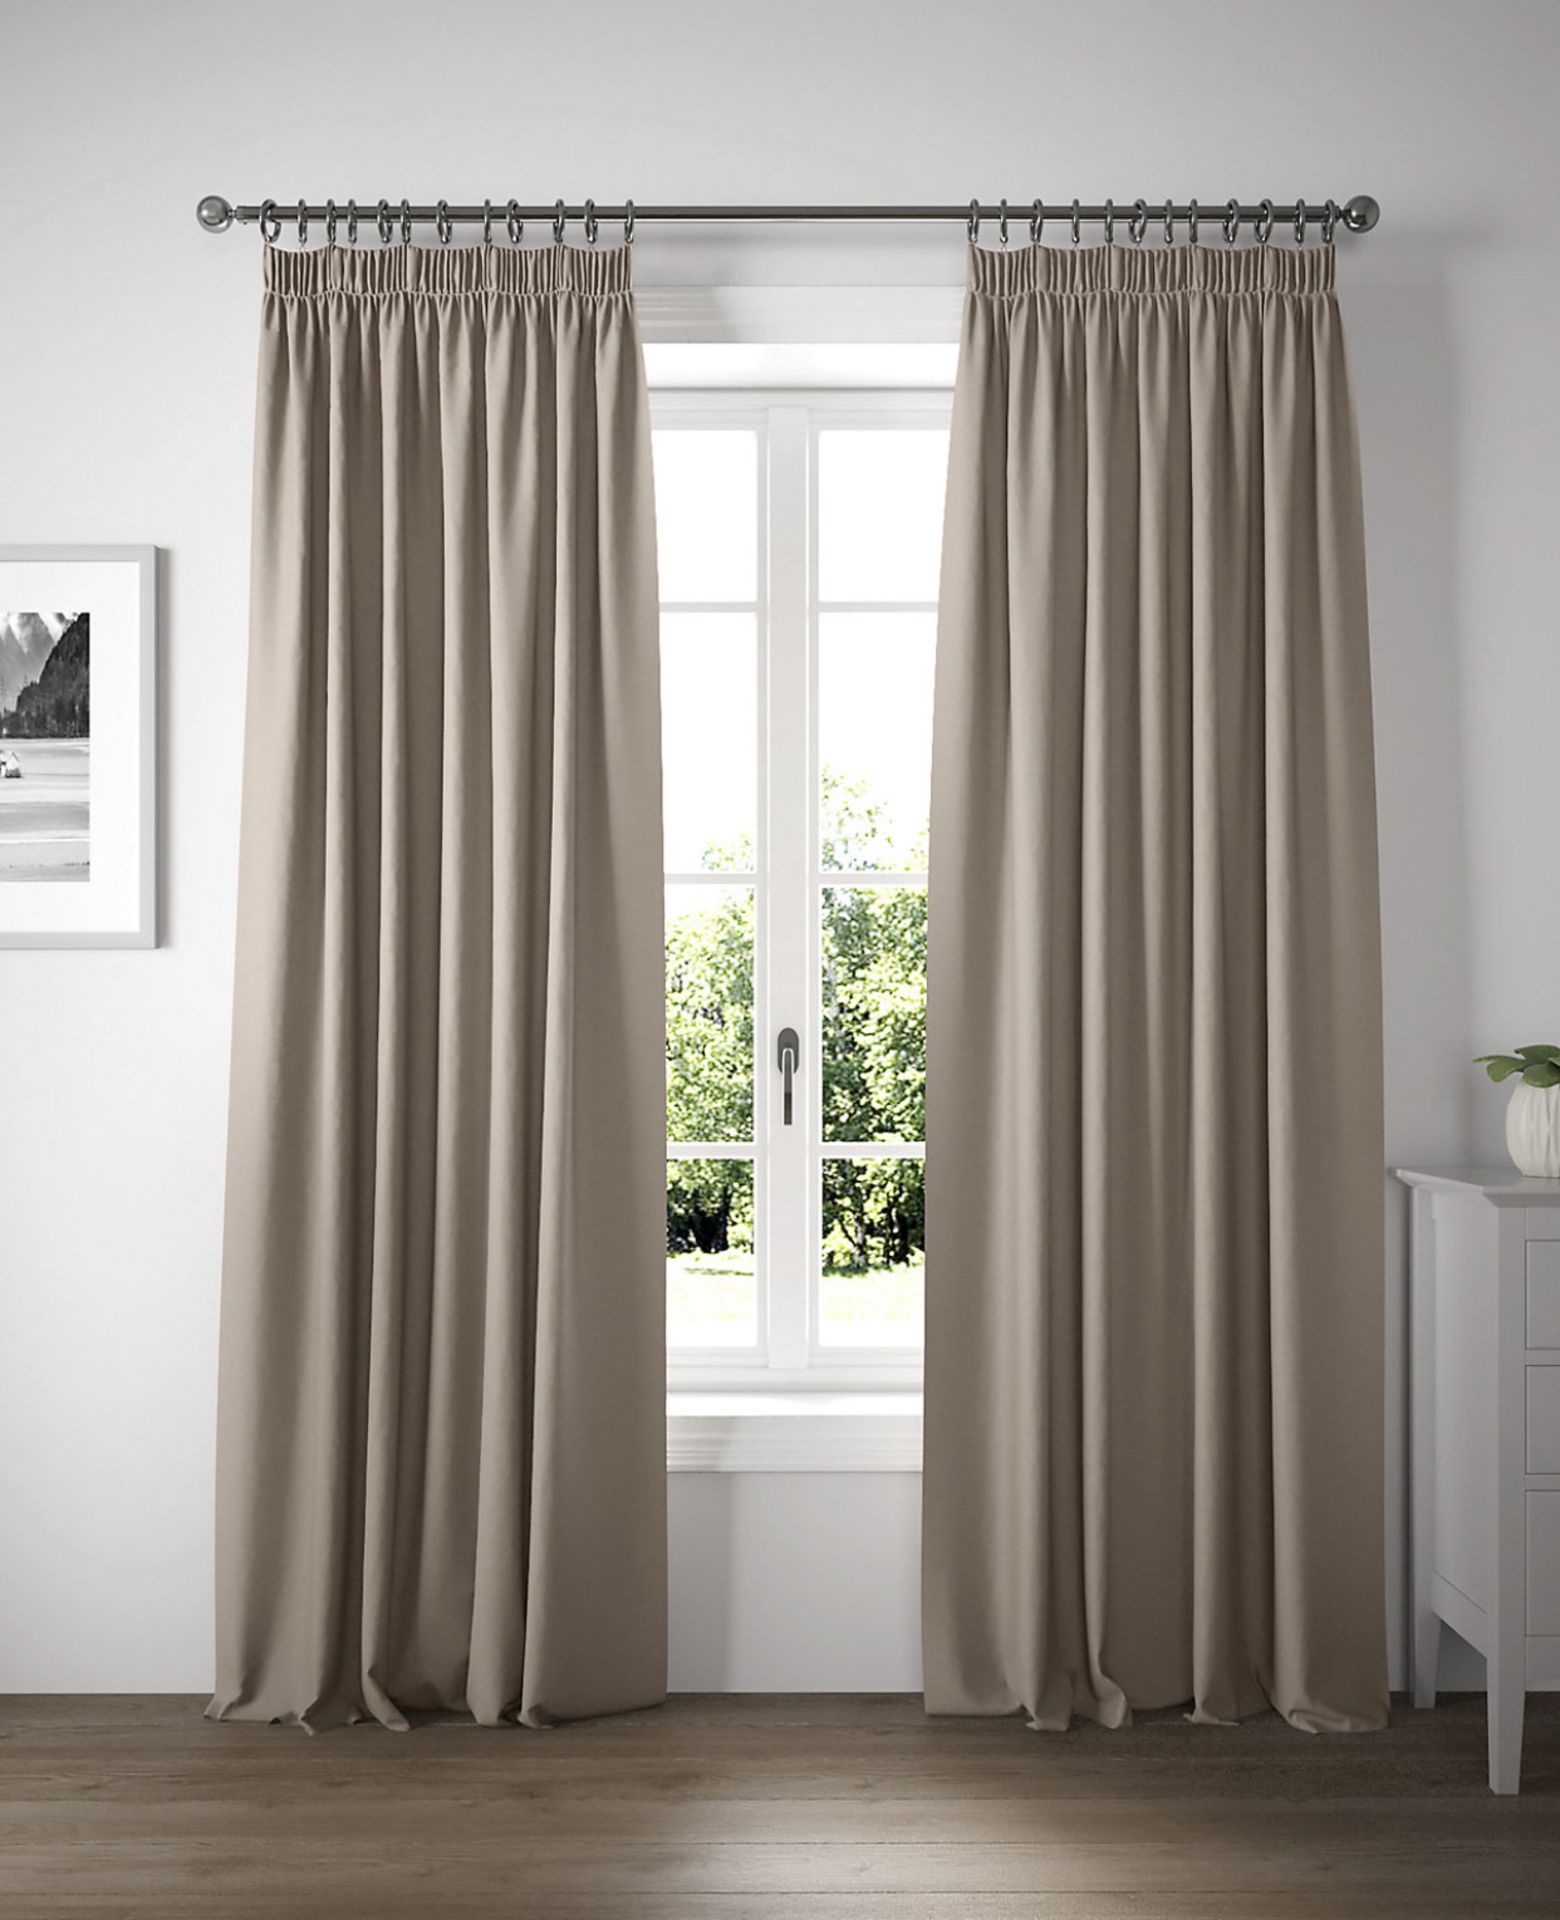 Thermal Pencil Pleat Blackout Curtains RRP £59